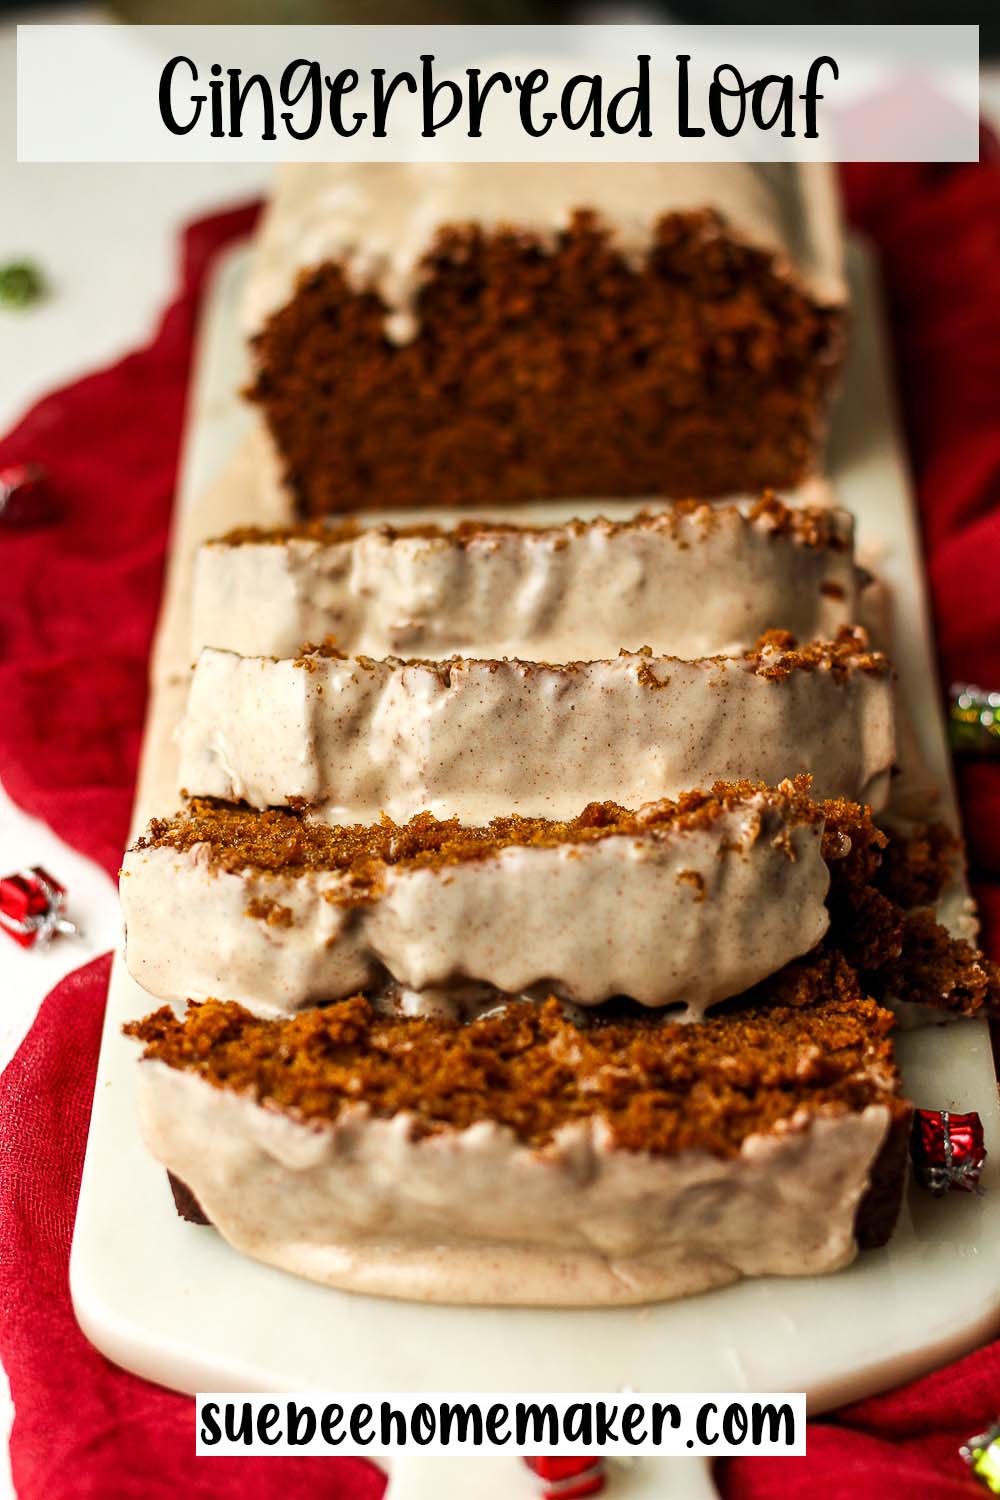 Side view of a sliced and glazed gingerbread loaf.